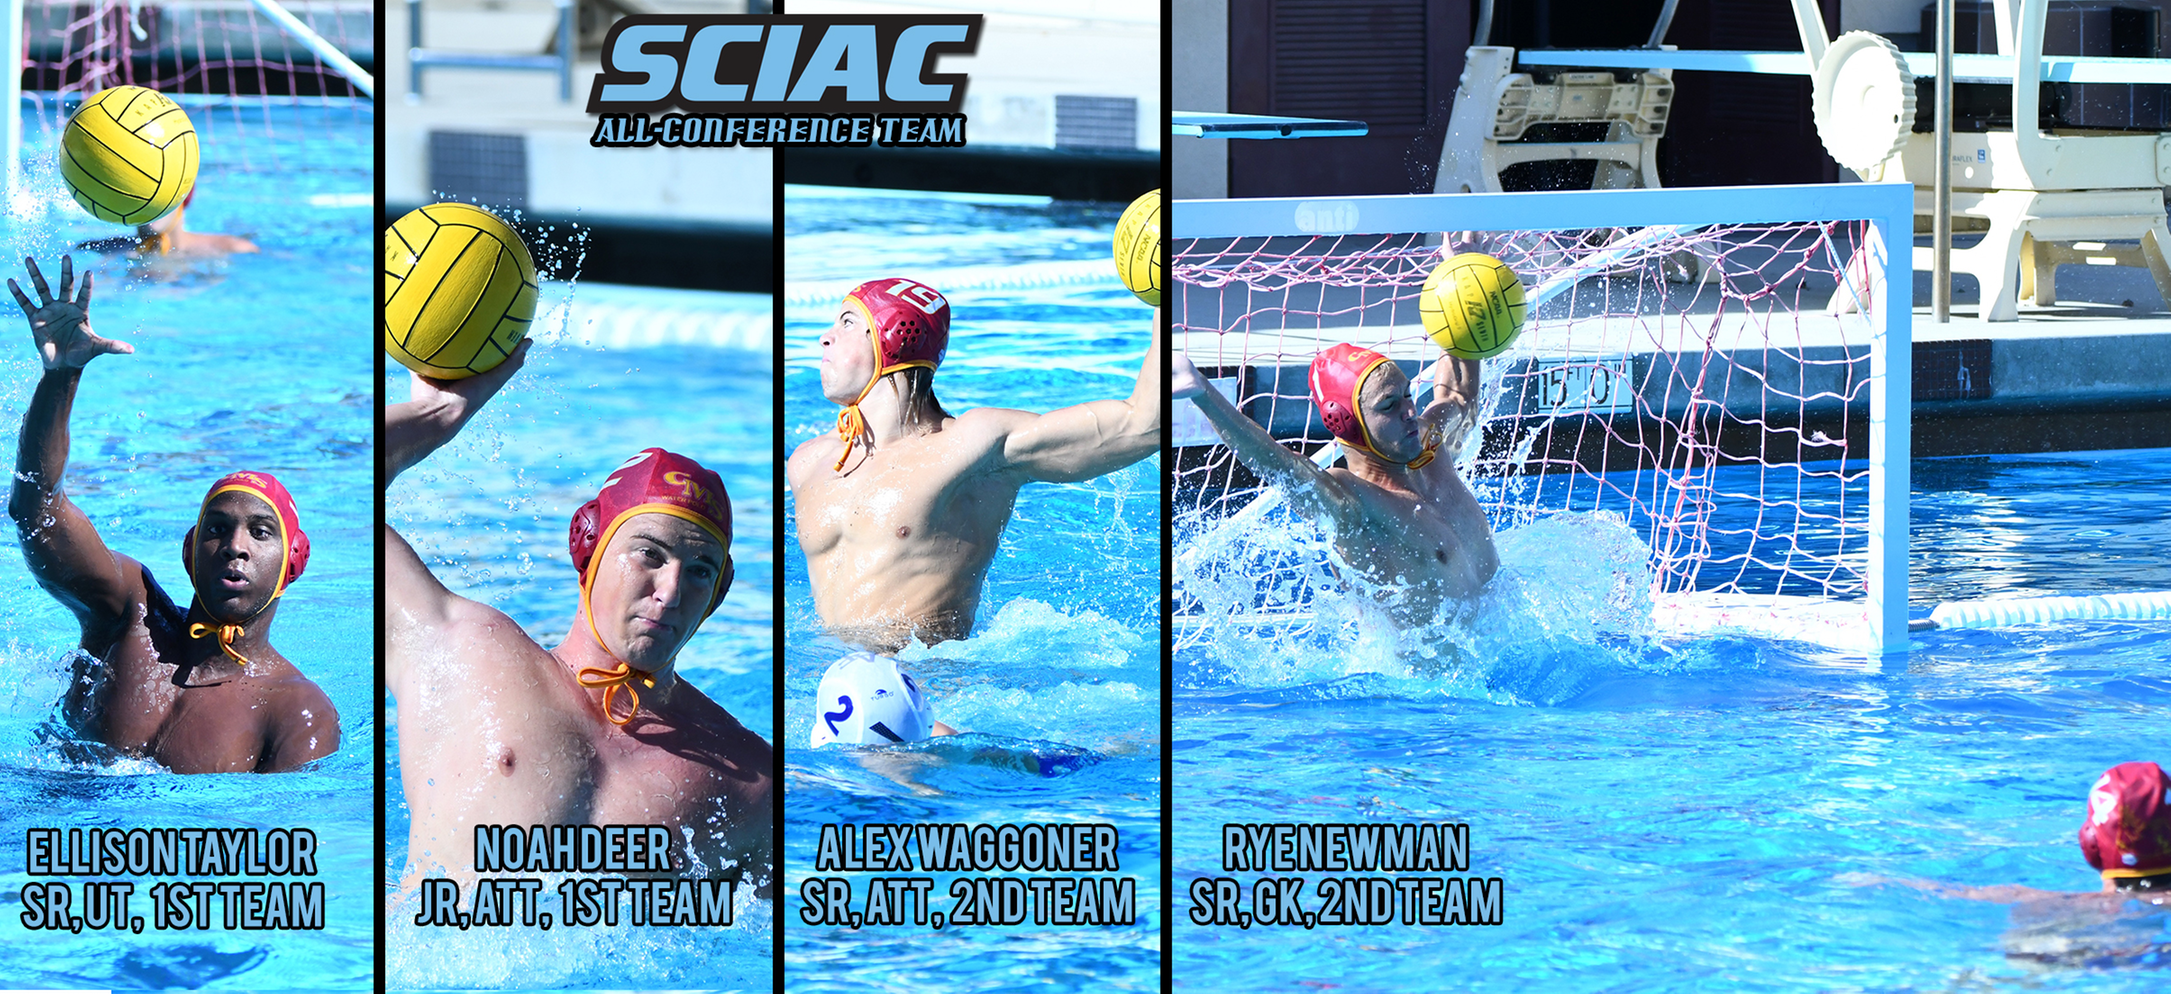 Four Stags All-SCIAC after valiant playoff run